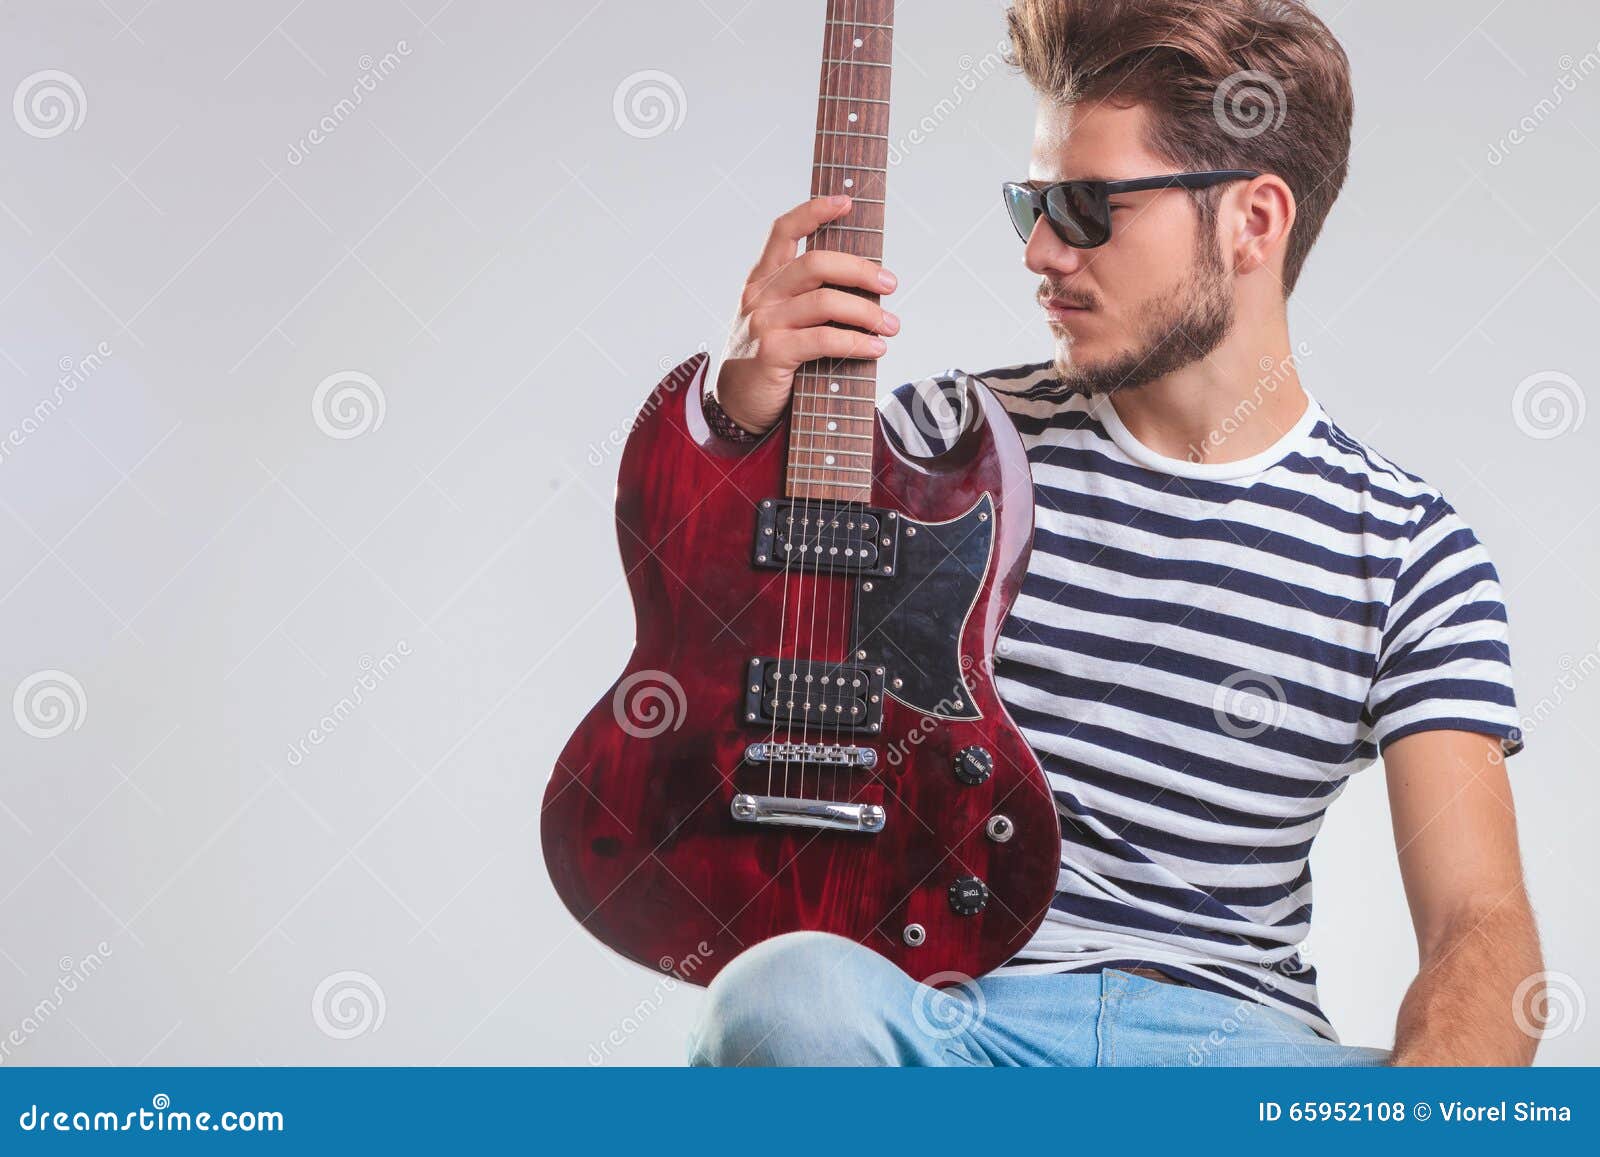 Premium Photo | A young musician striking a pose while holding his guitar